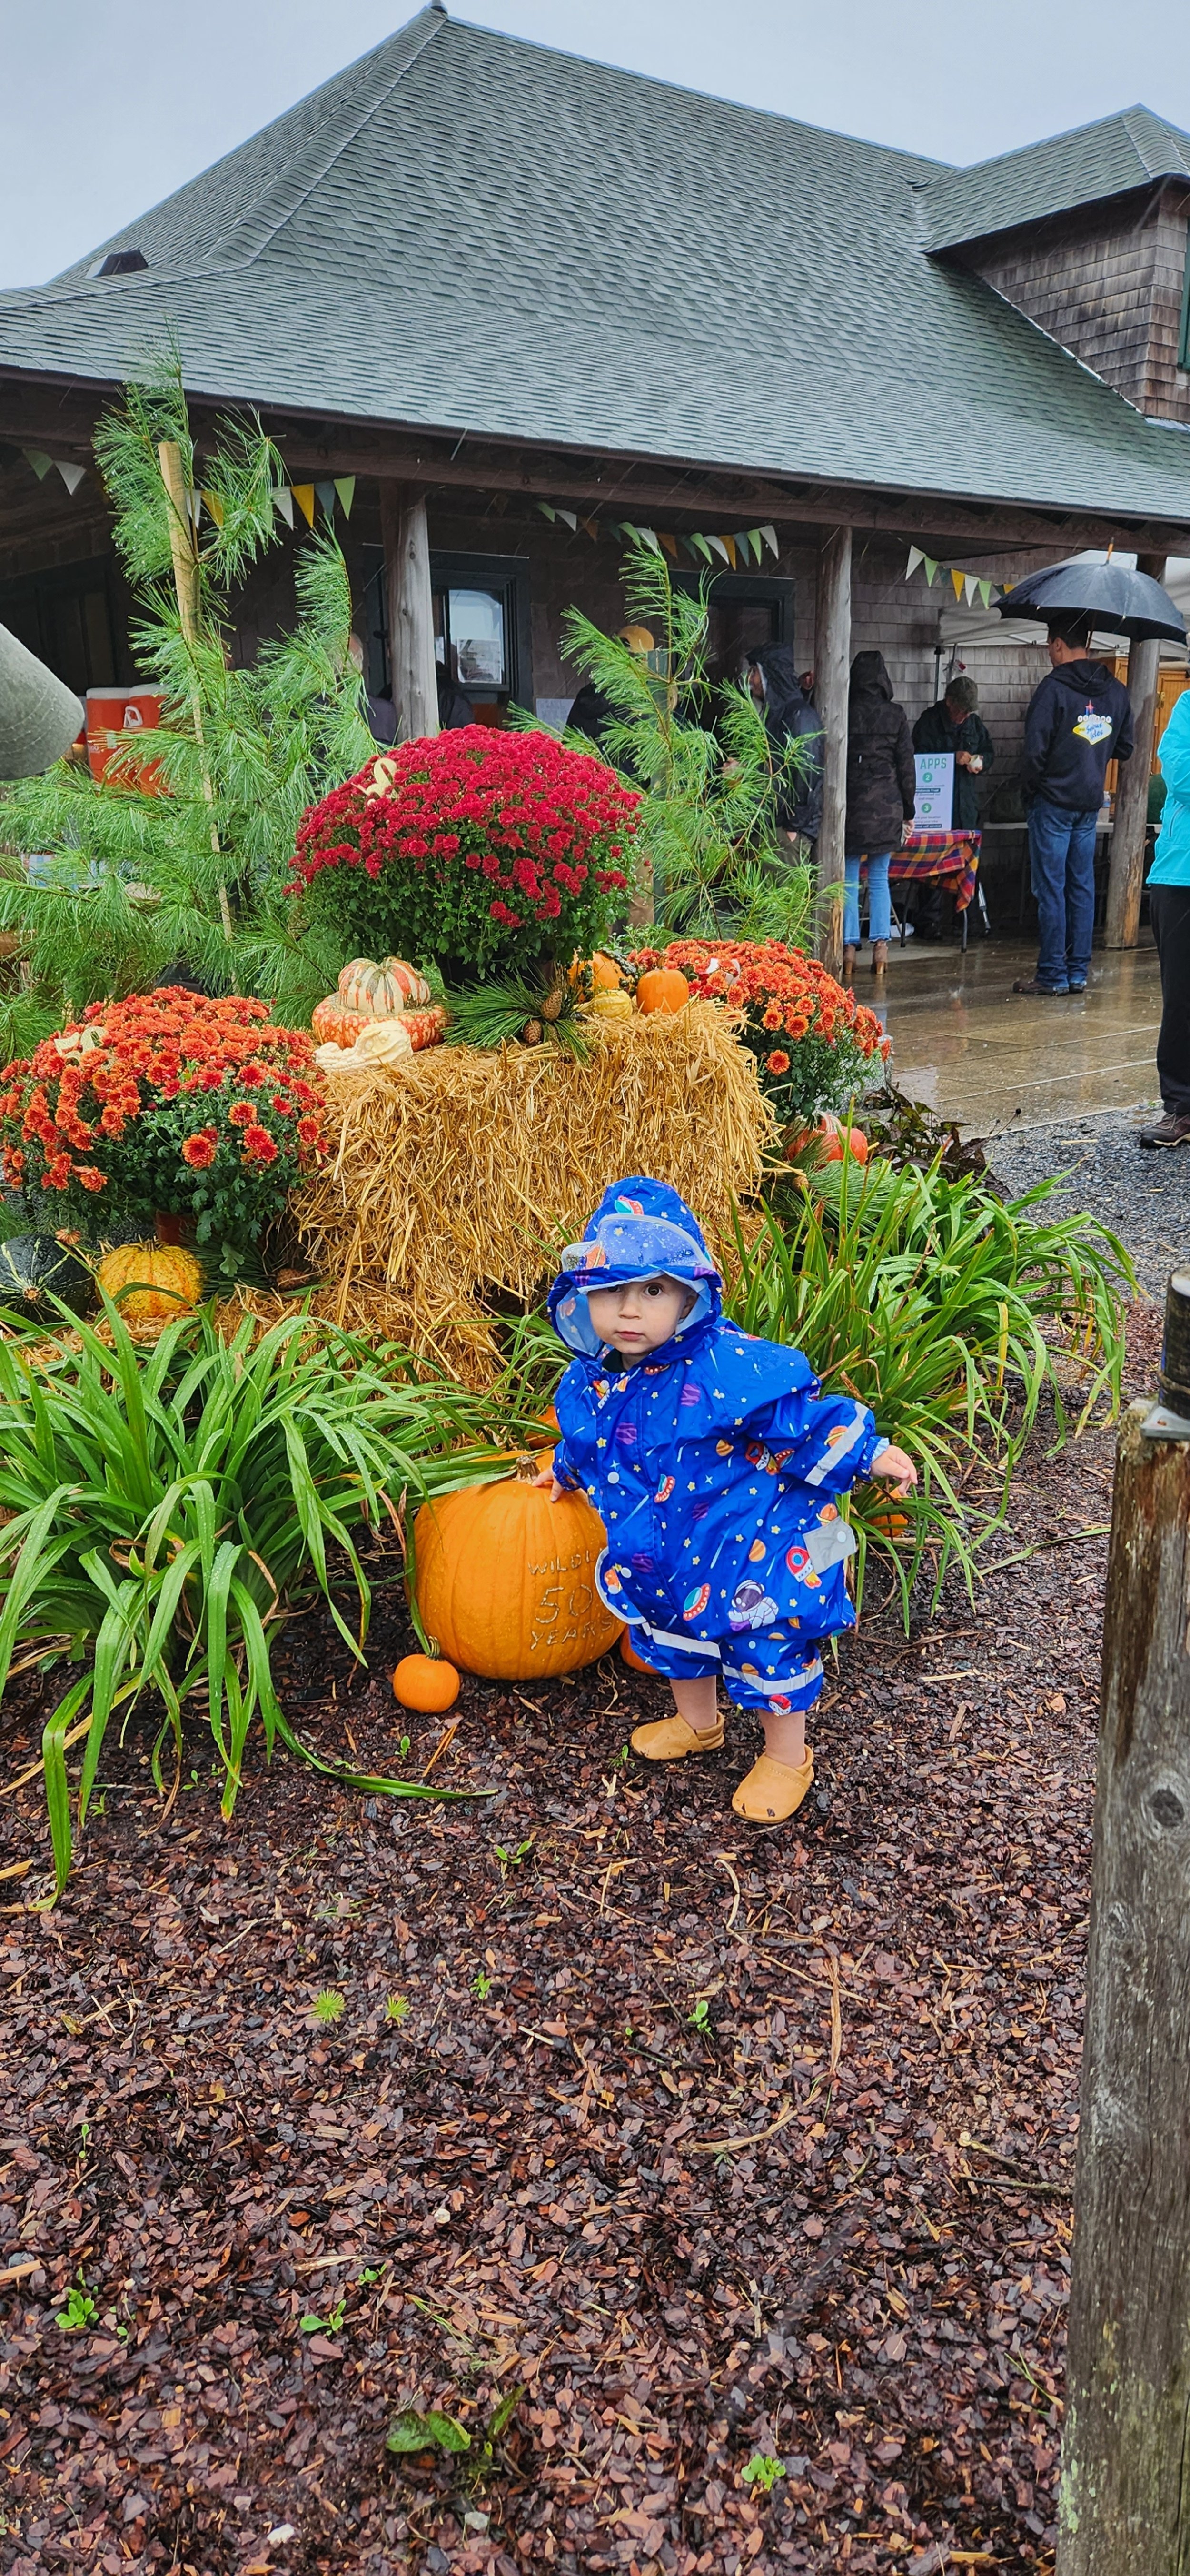 A young guest poses with autumnal decorations.